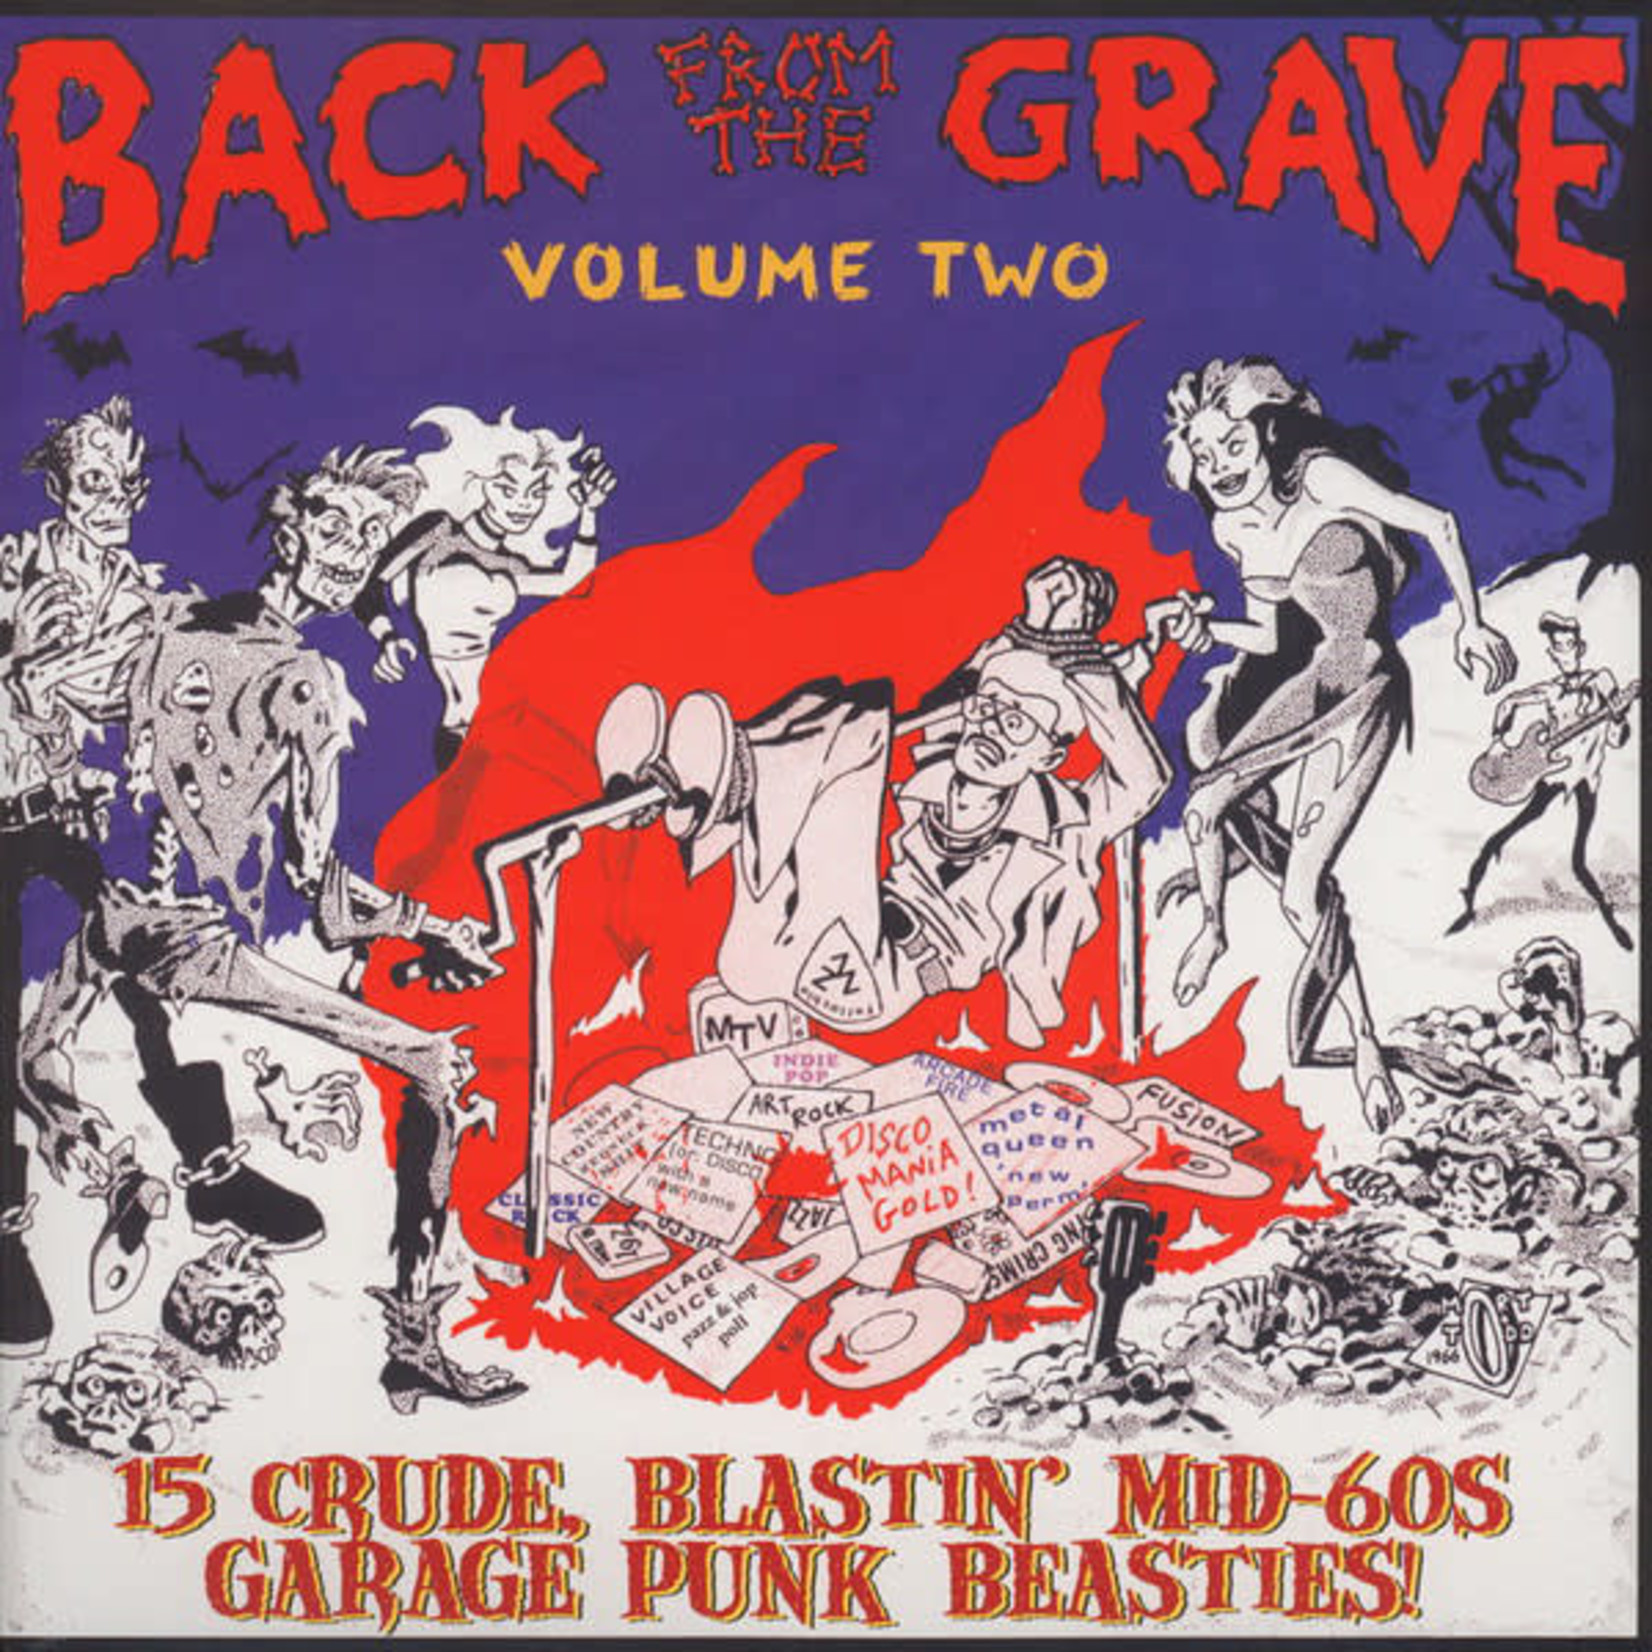 Crypt V/A - Back From The Grave Volume Two (LP)